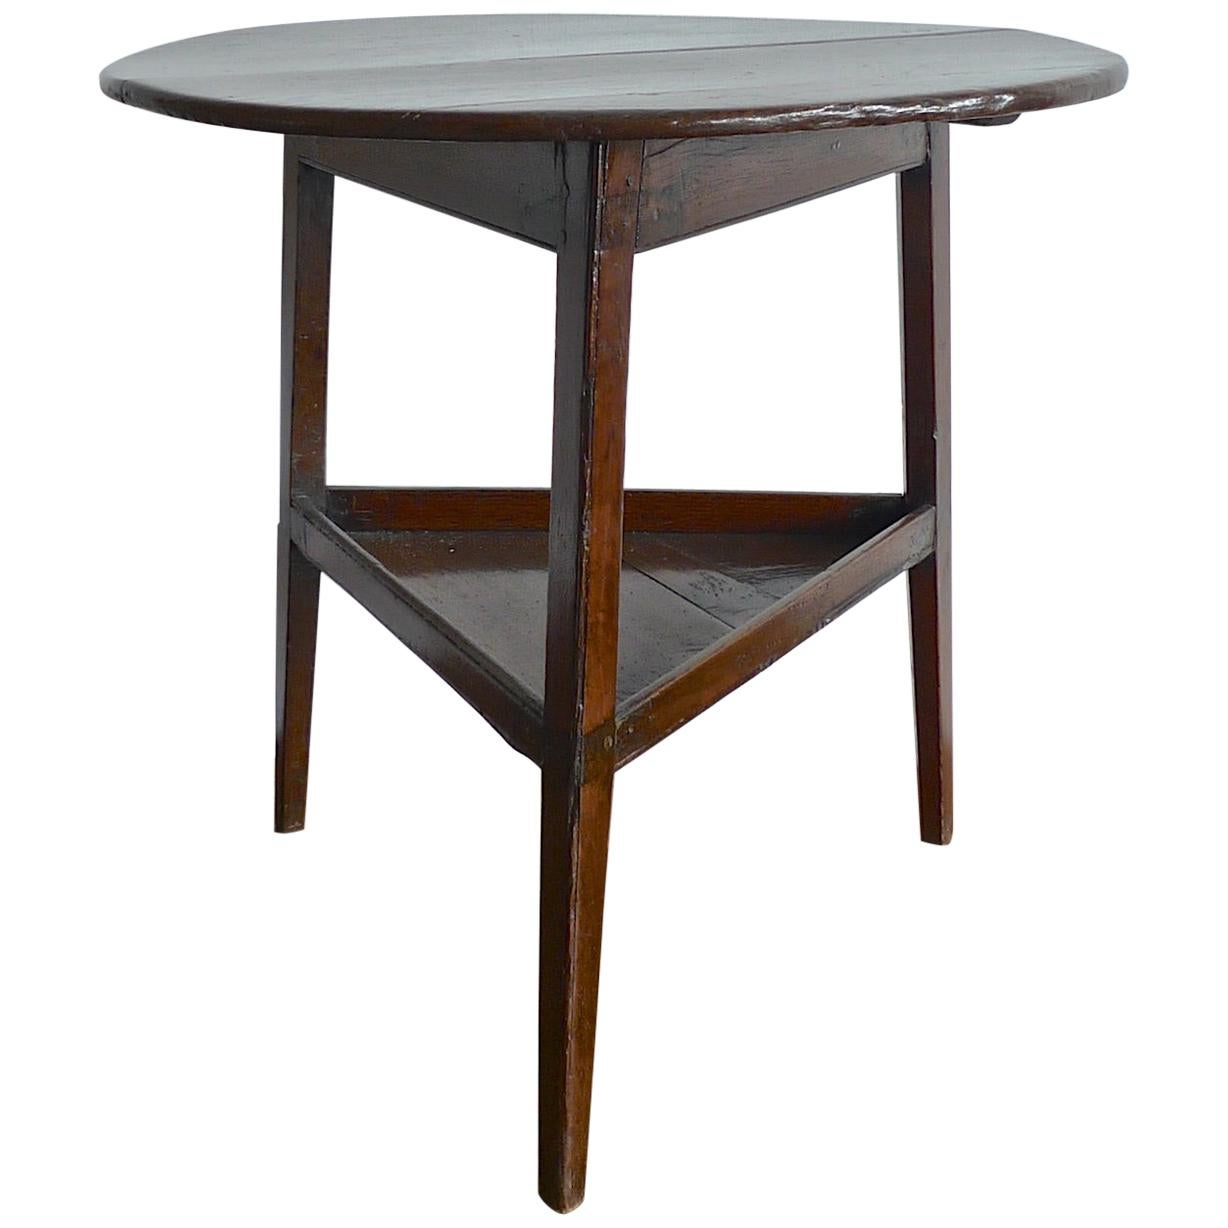 English 19th Century Small Stained Walnut Cricket Table.